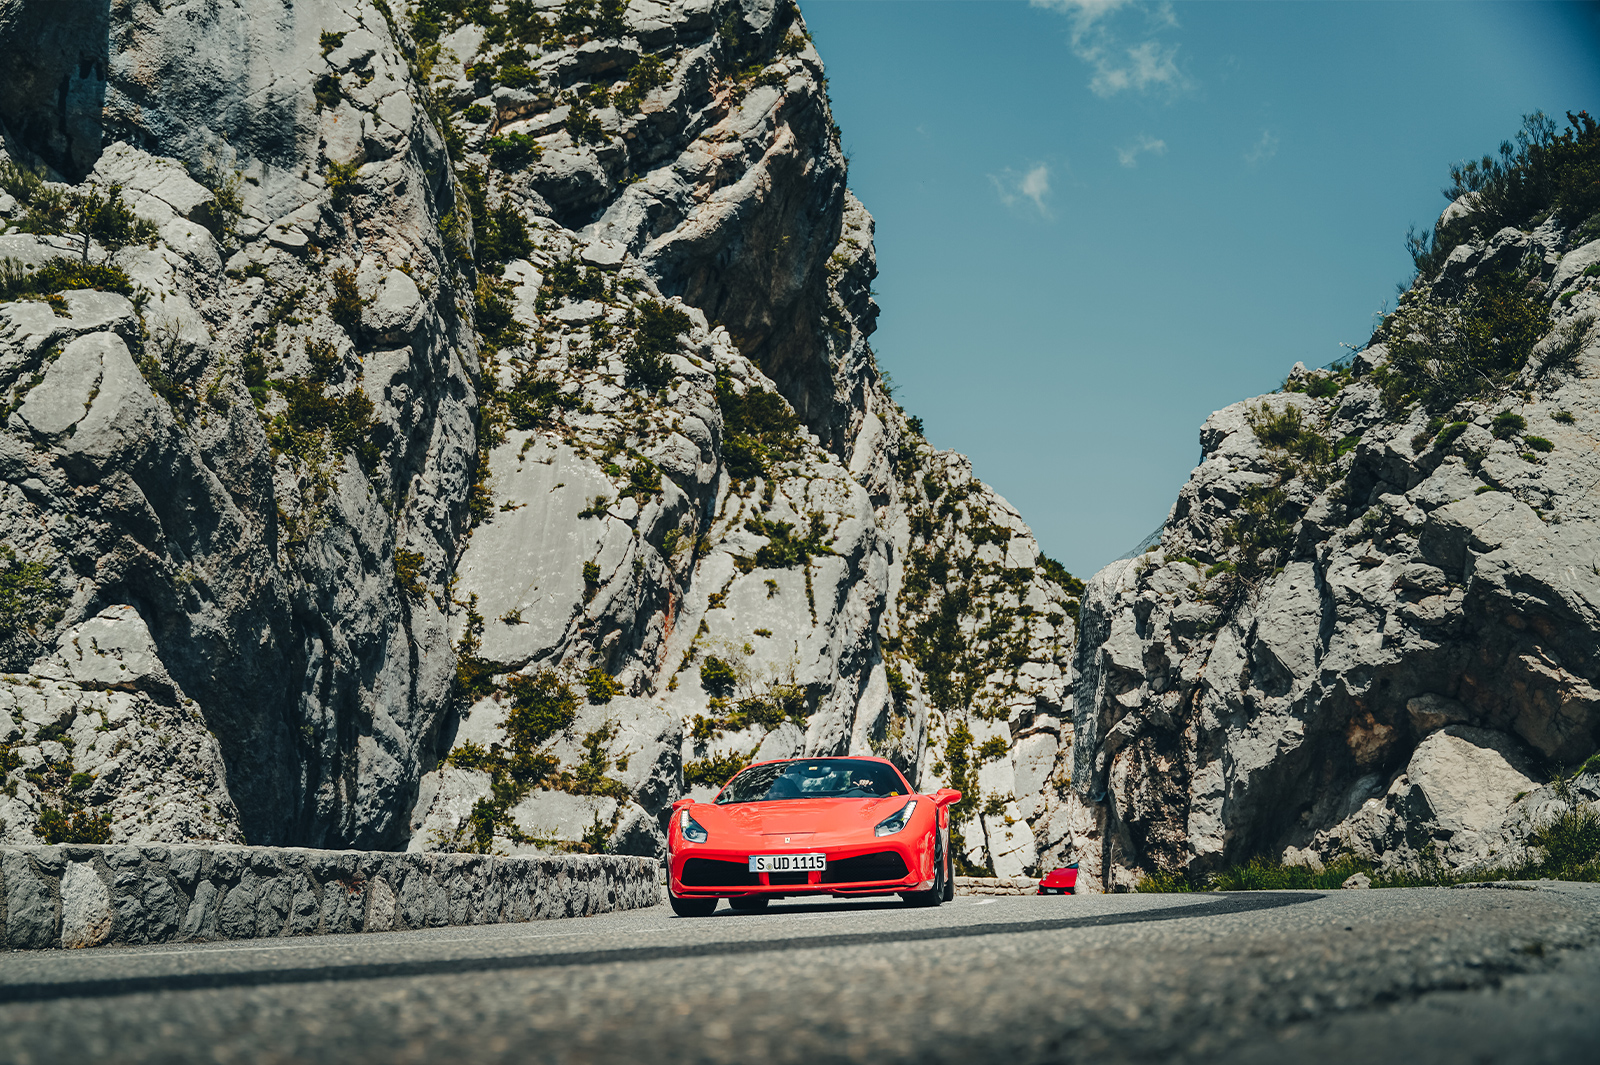 A red Ferrari carves through a steep rocky gully on an Ultimate Driving Tours holiday